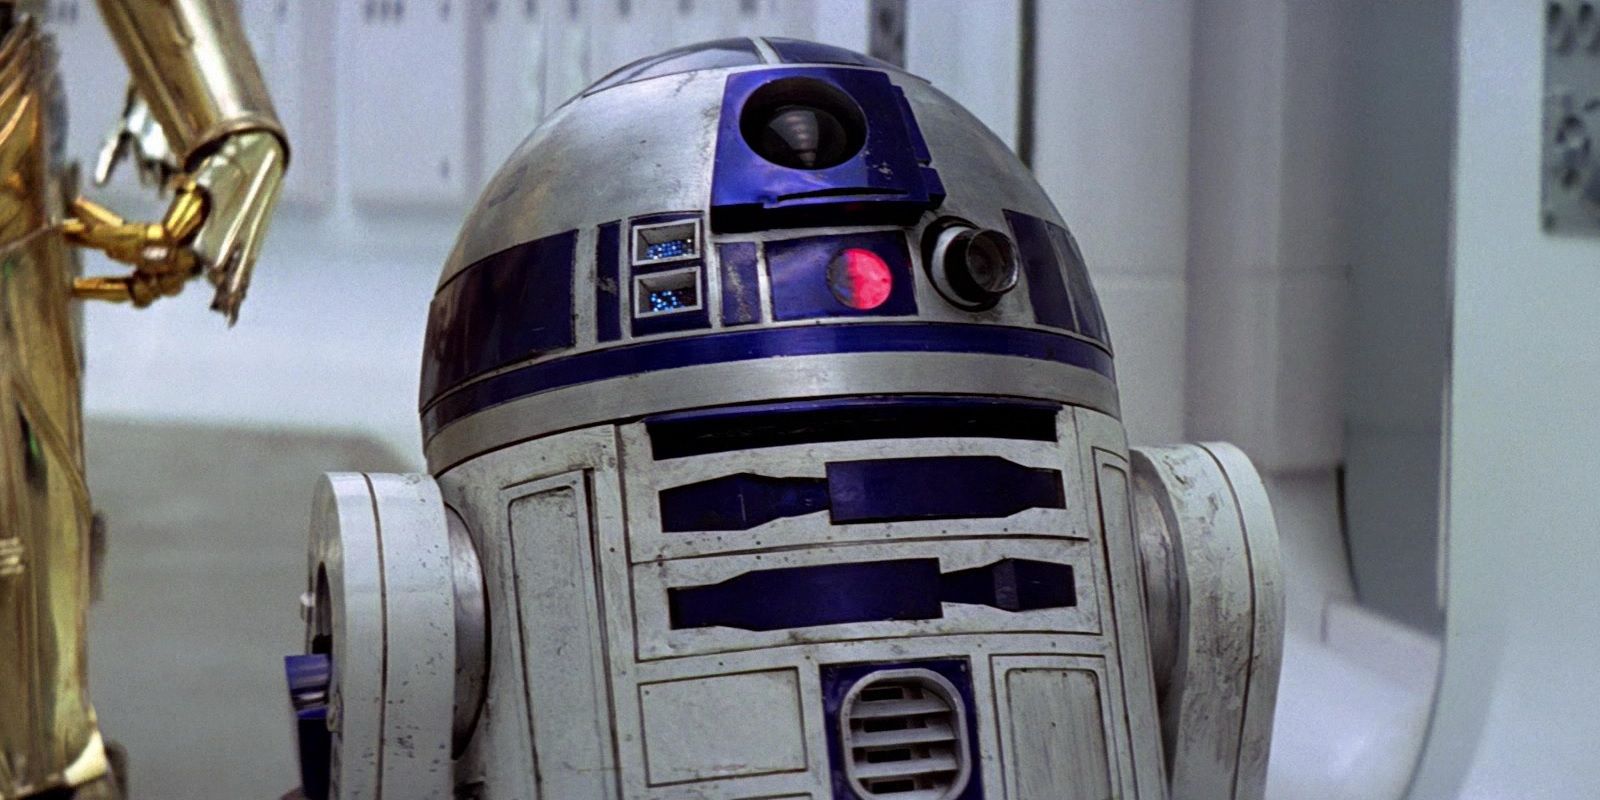 R2 D2 on board Tantive IV in the opening scene of Star Wars